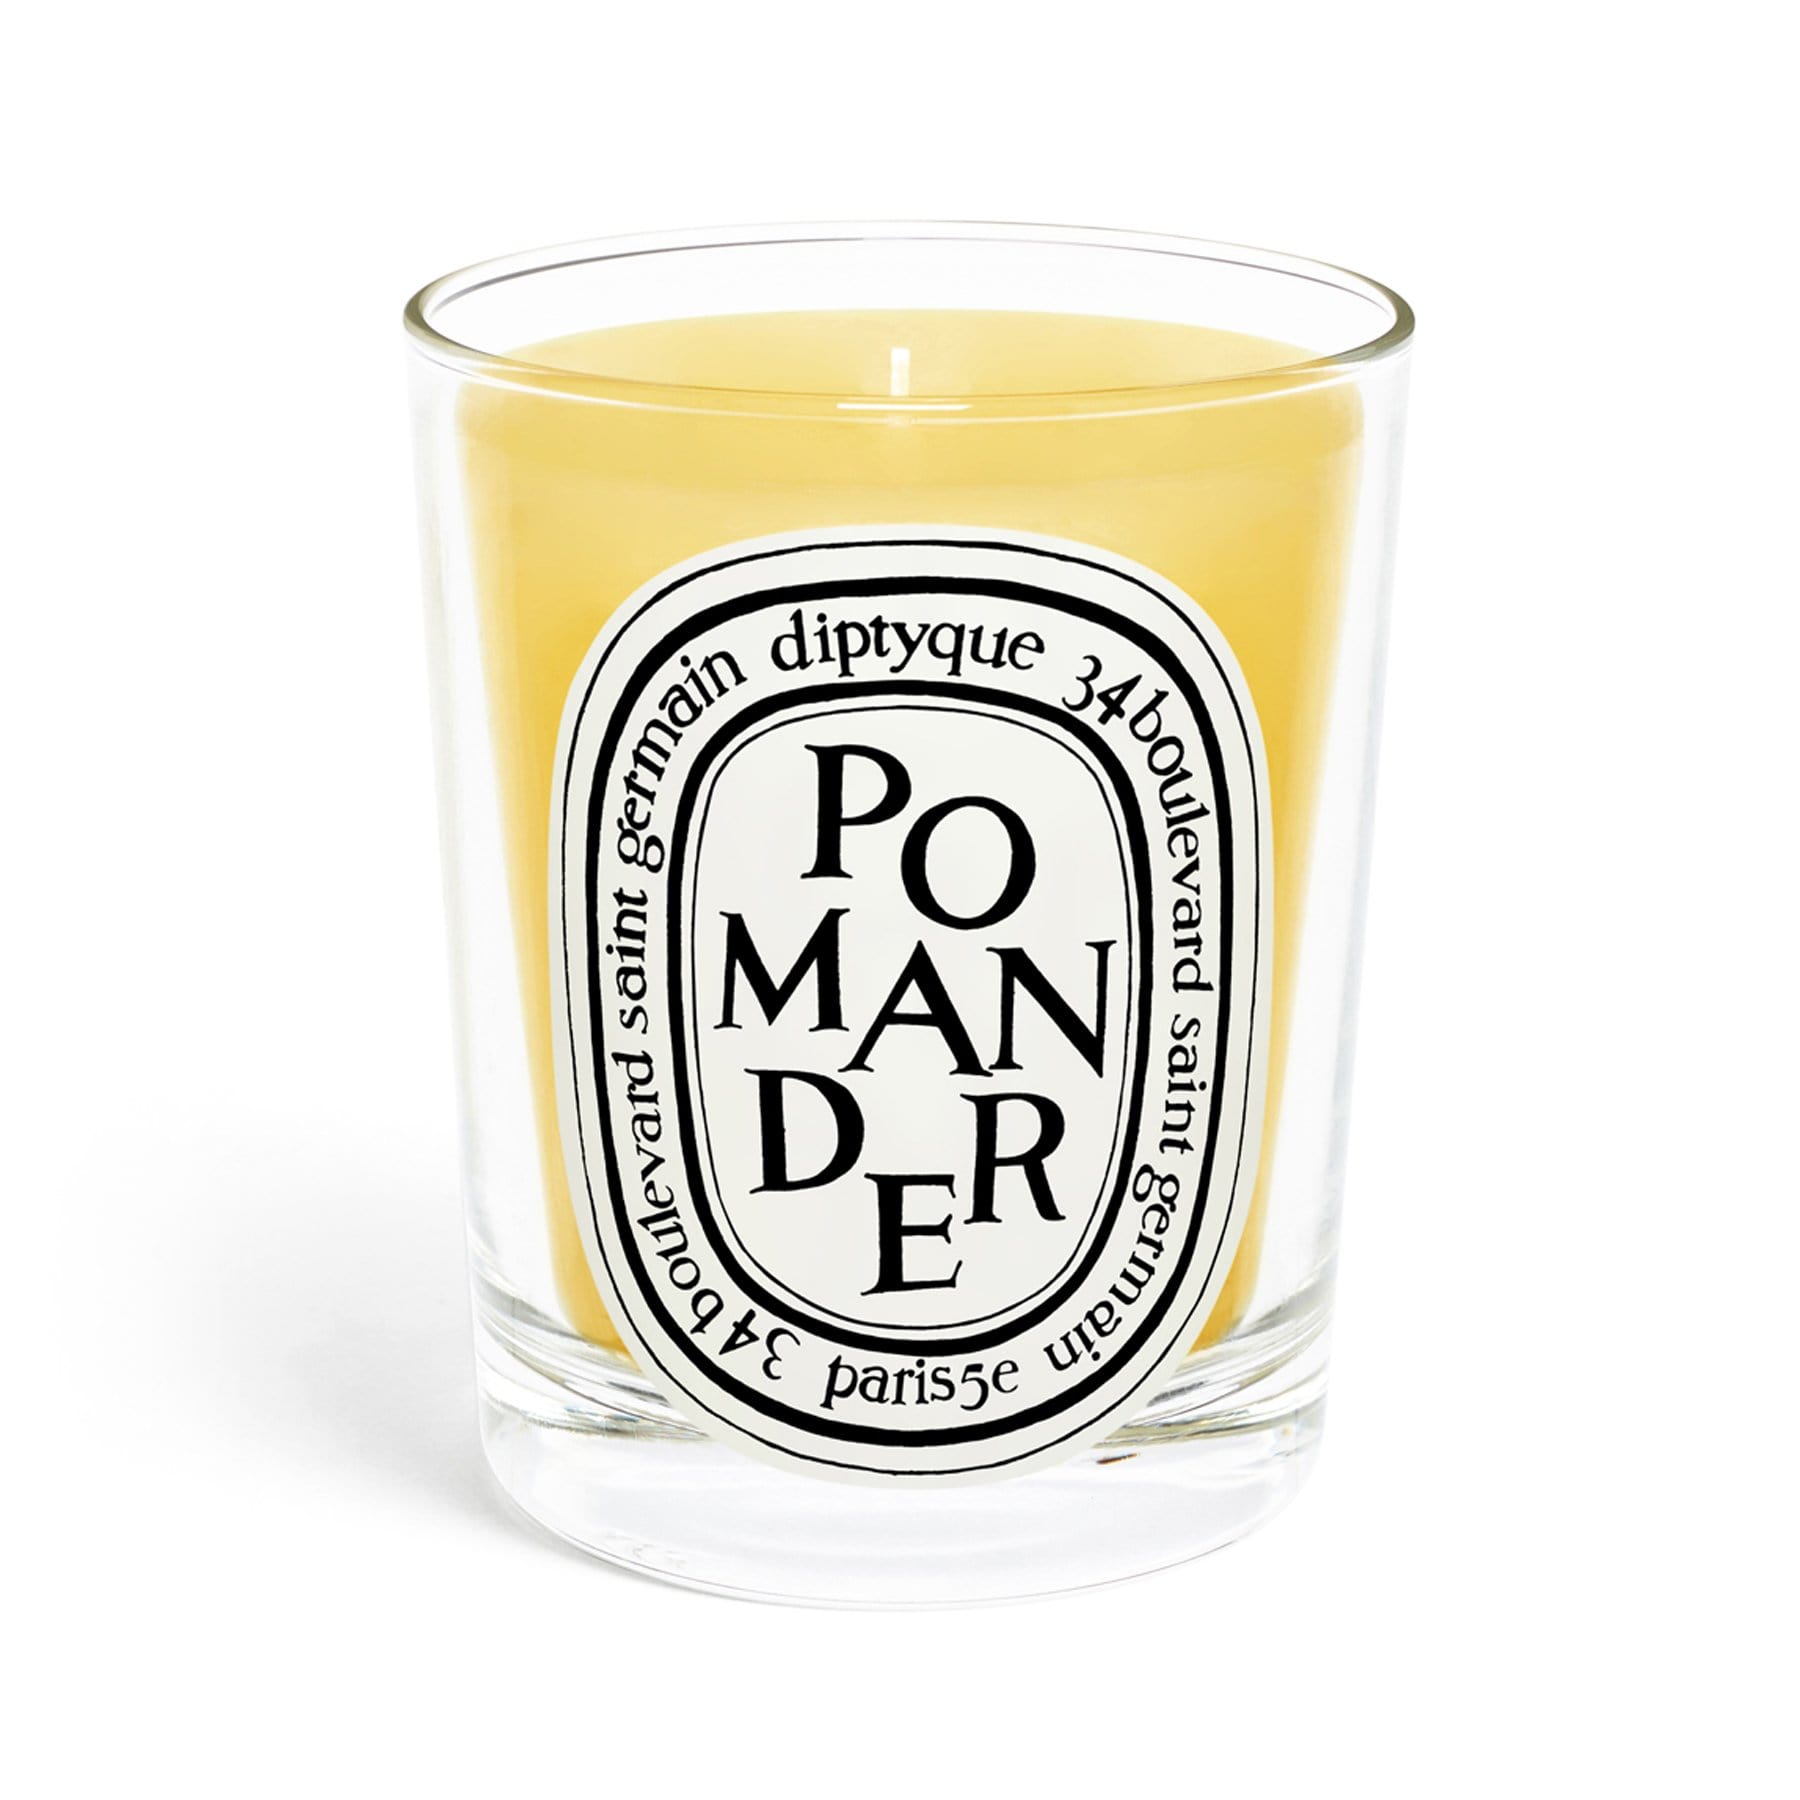 Pomander Diptyque Scented candle